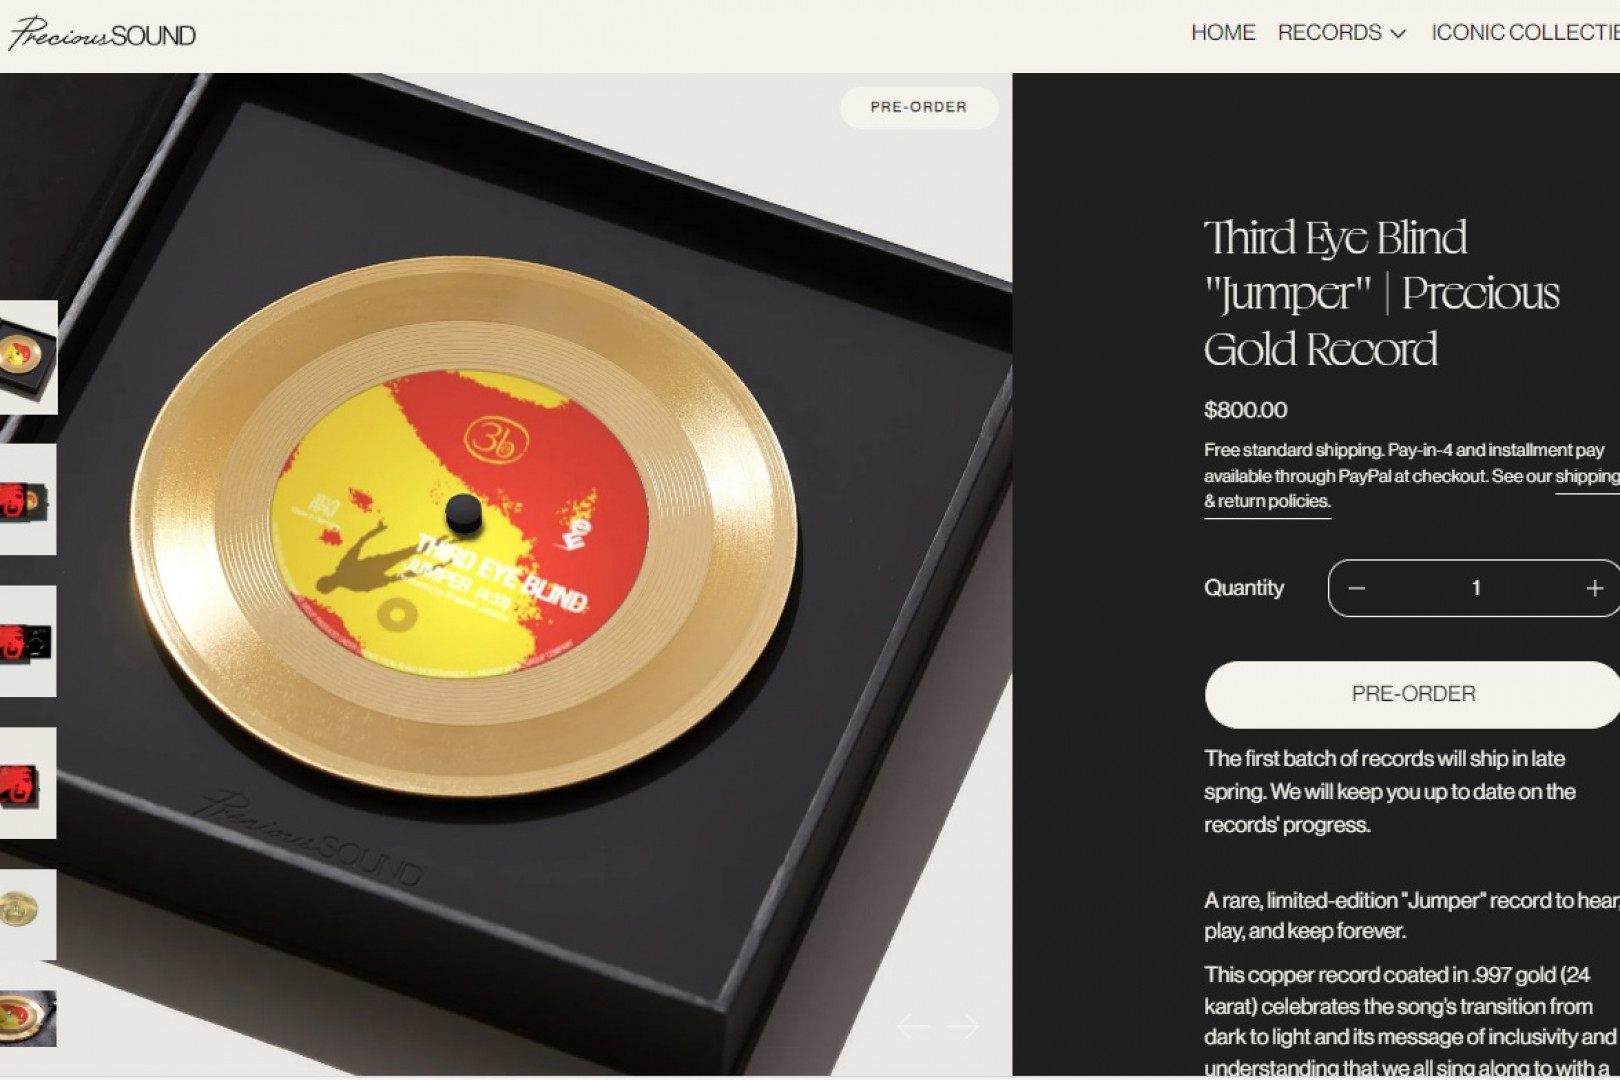 Third Eye Blind wants you to buy an $800 gold press of "Jumper"